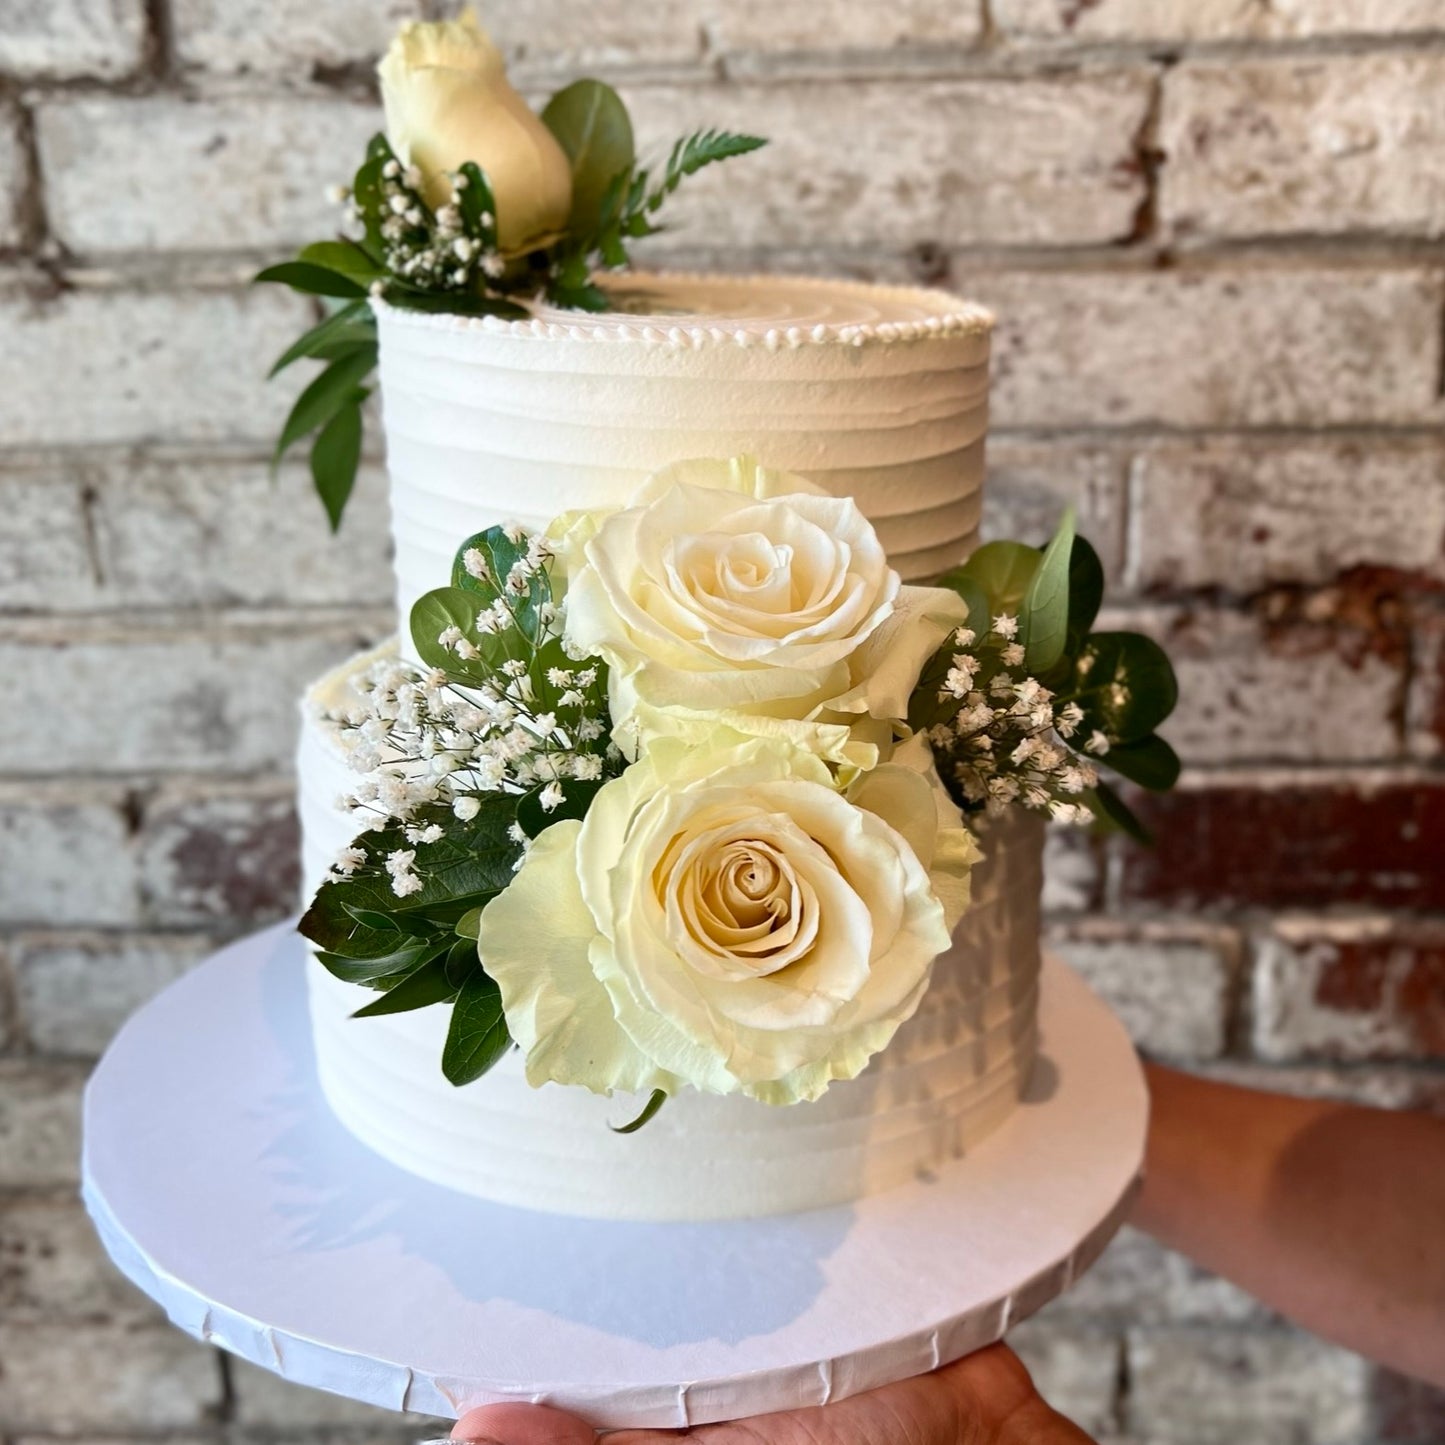 Two-tiered white cake with fresh flowers